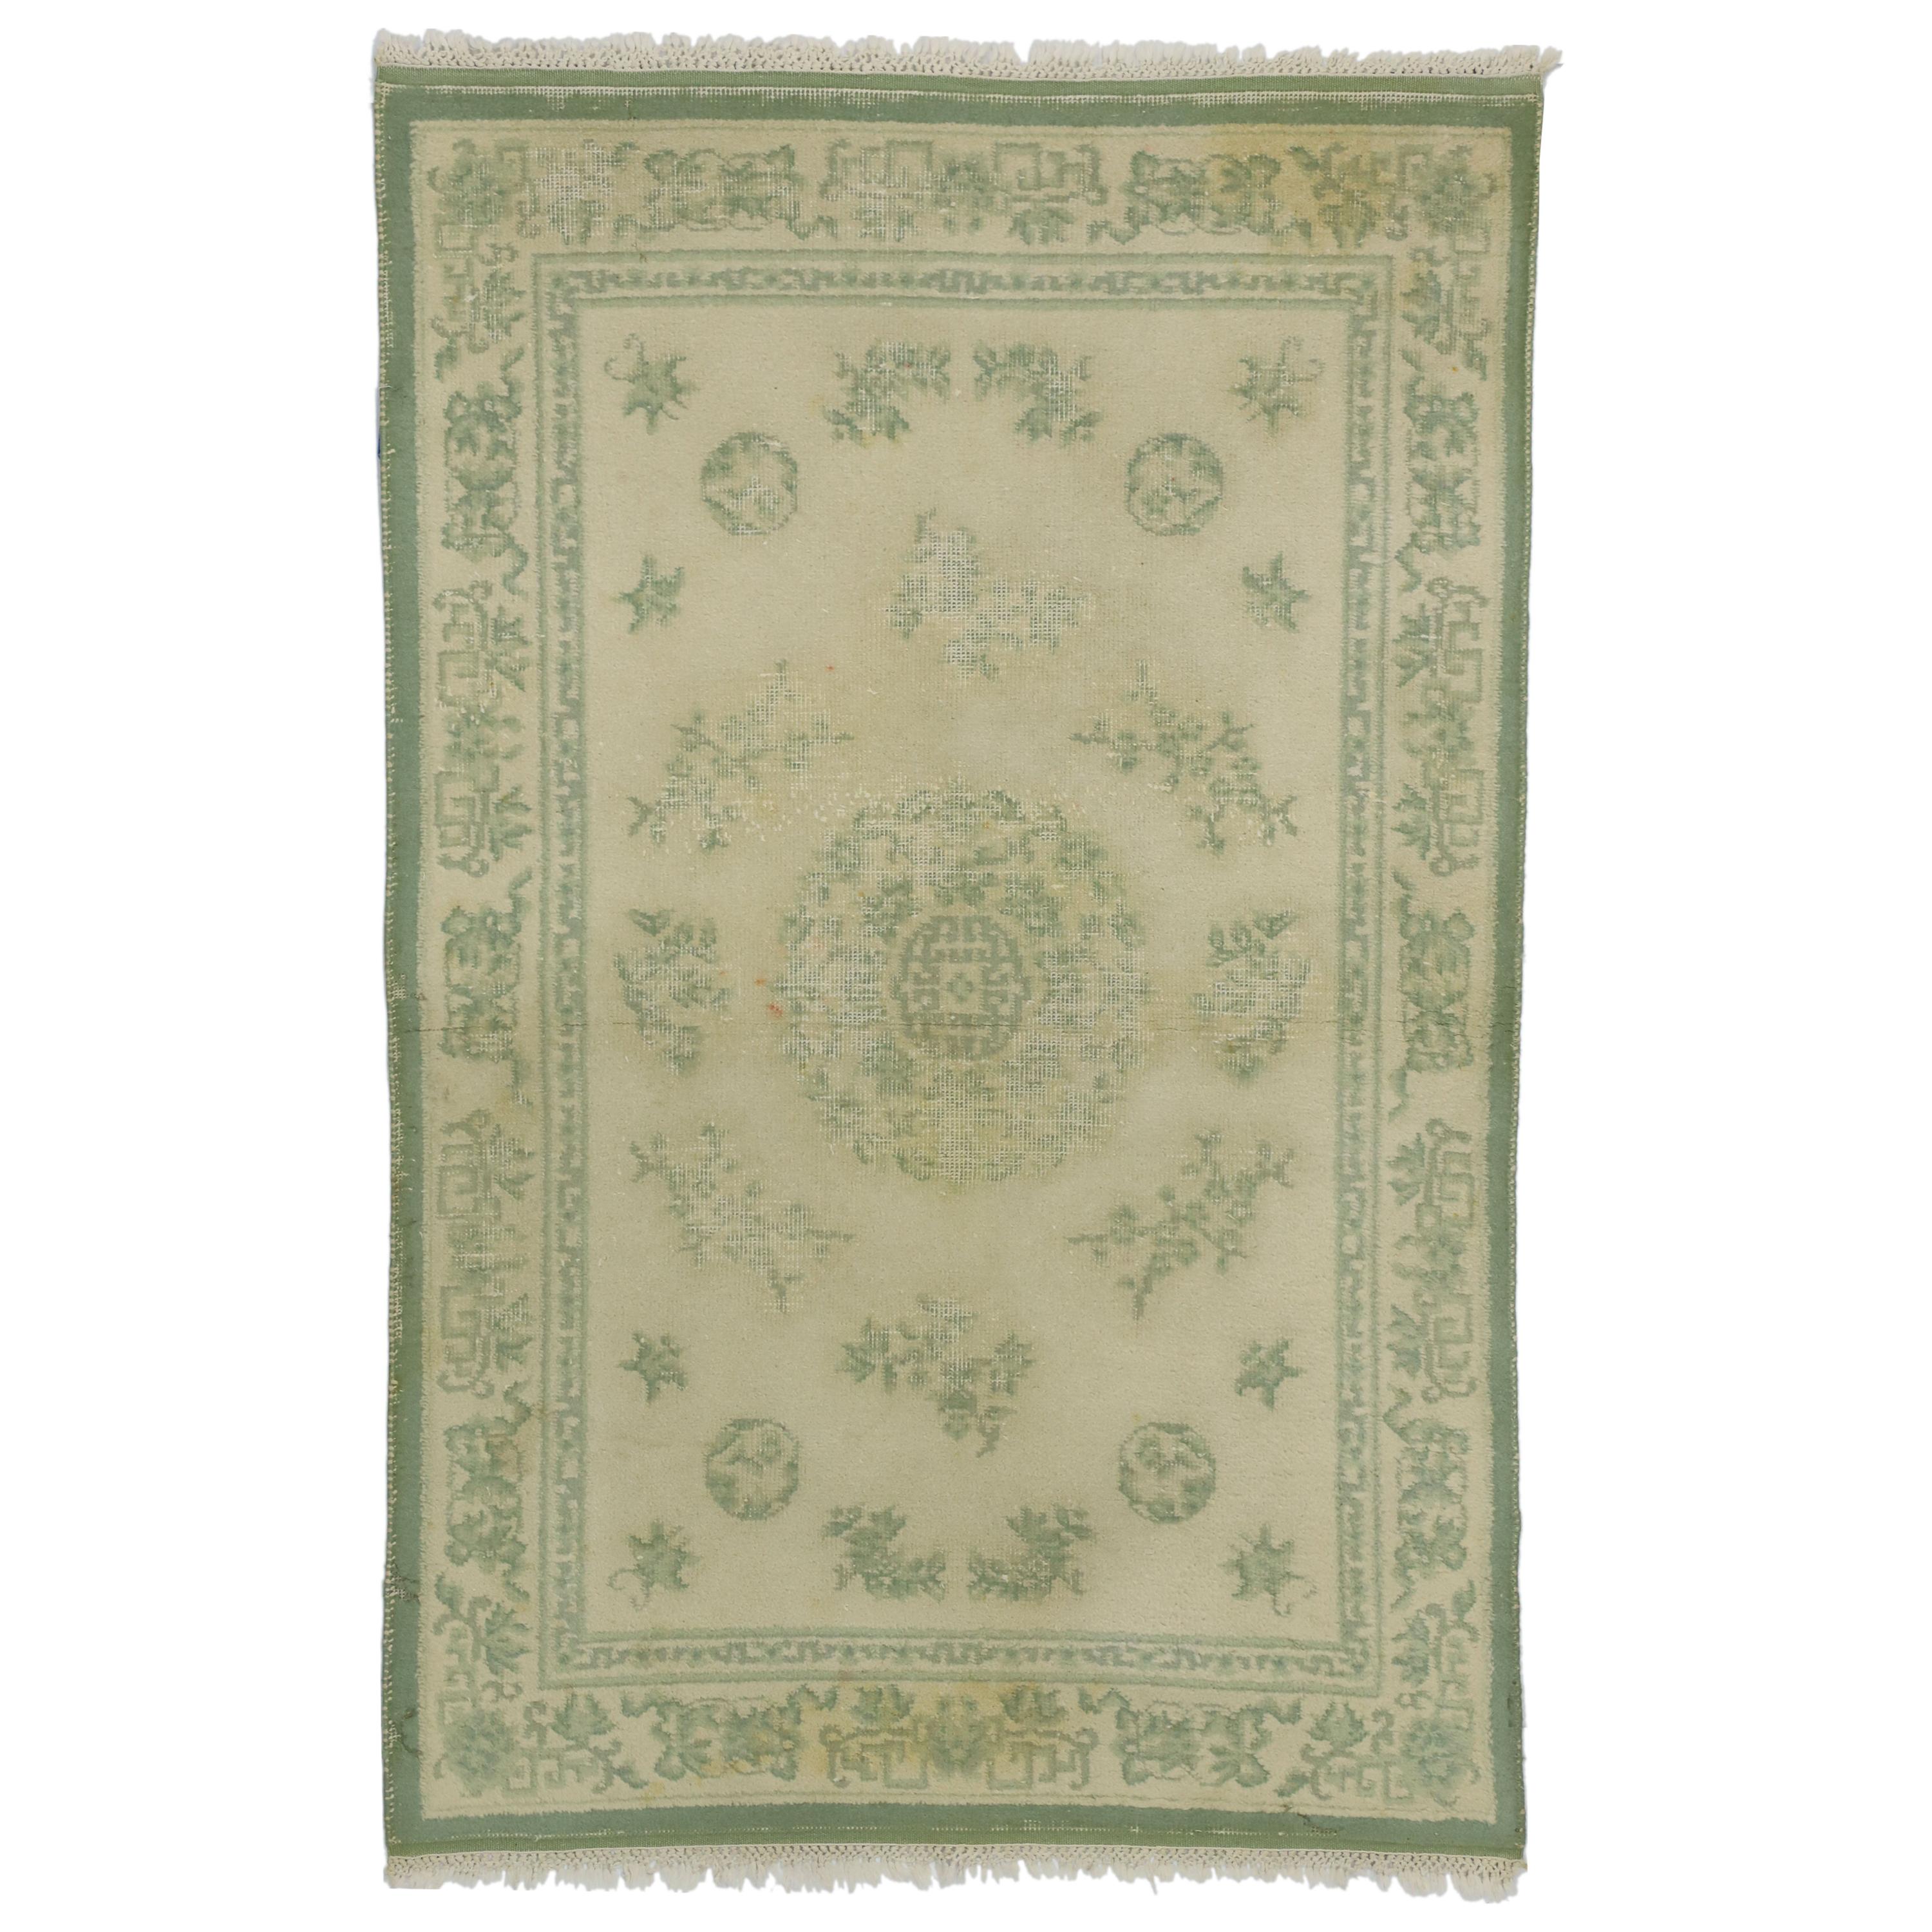 Distressed Weathered Vintage Indian Rug with Chinoiserie Shabby Chic Style